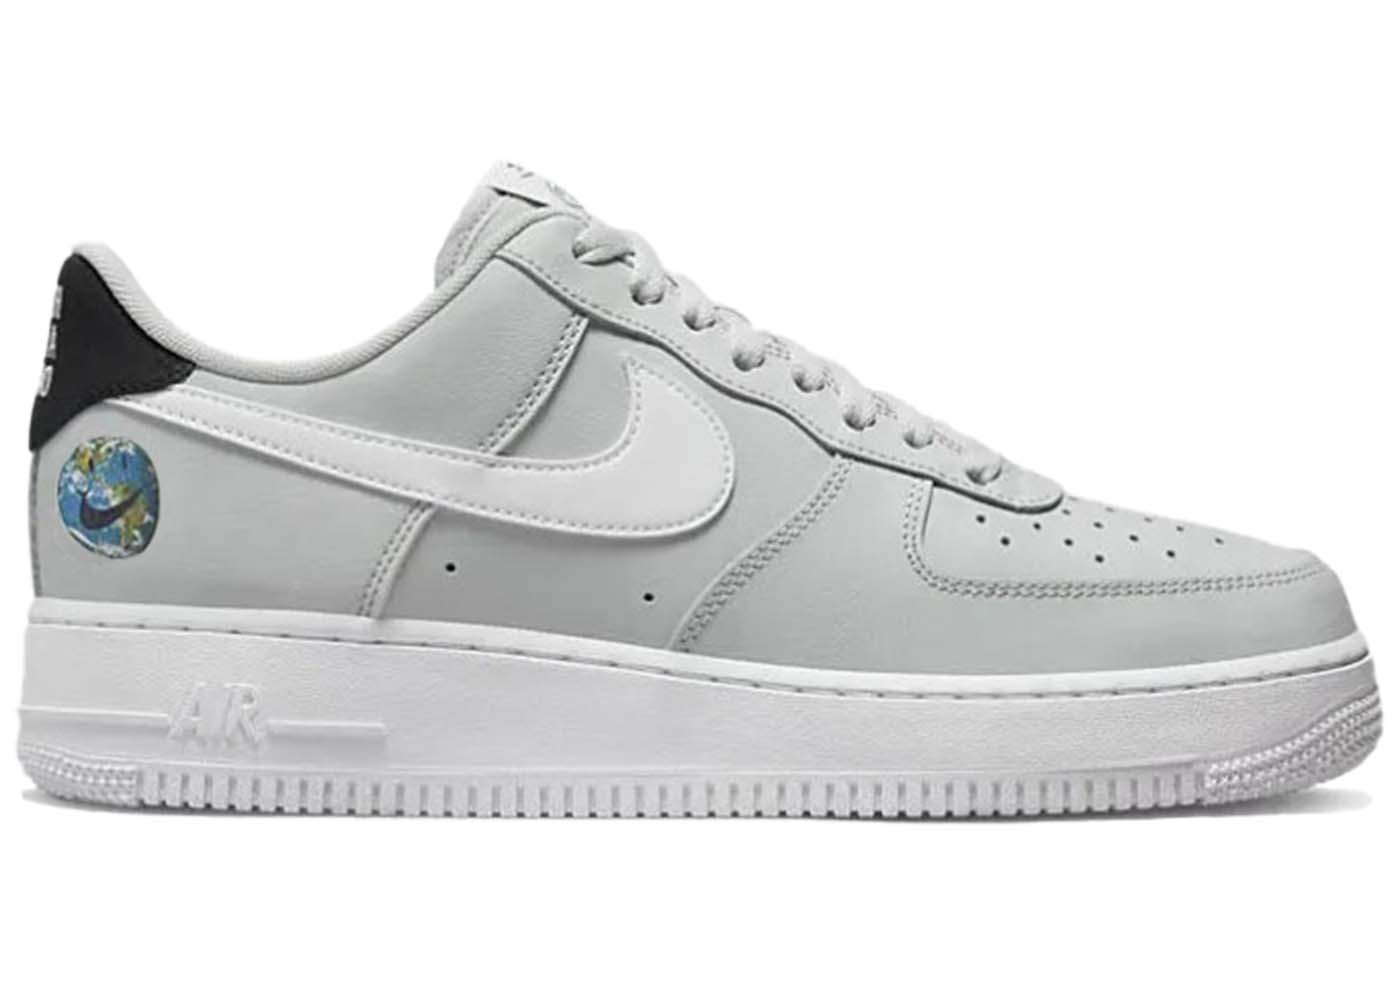 Nike Air Force 1 Low Have a Nike Day White Gold Men's - DM0118-100 